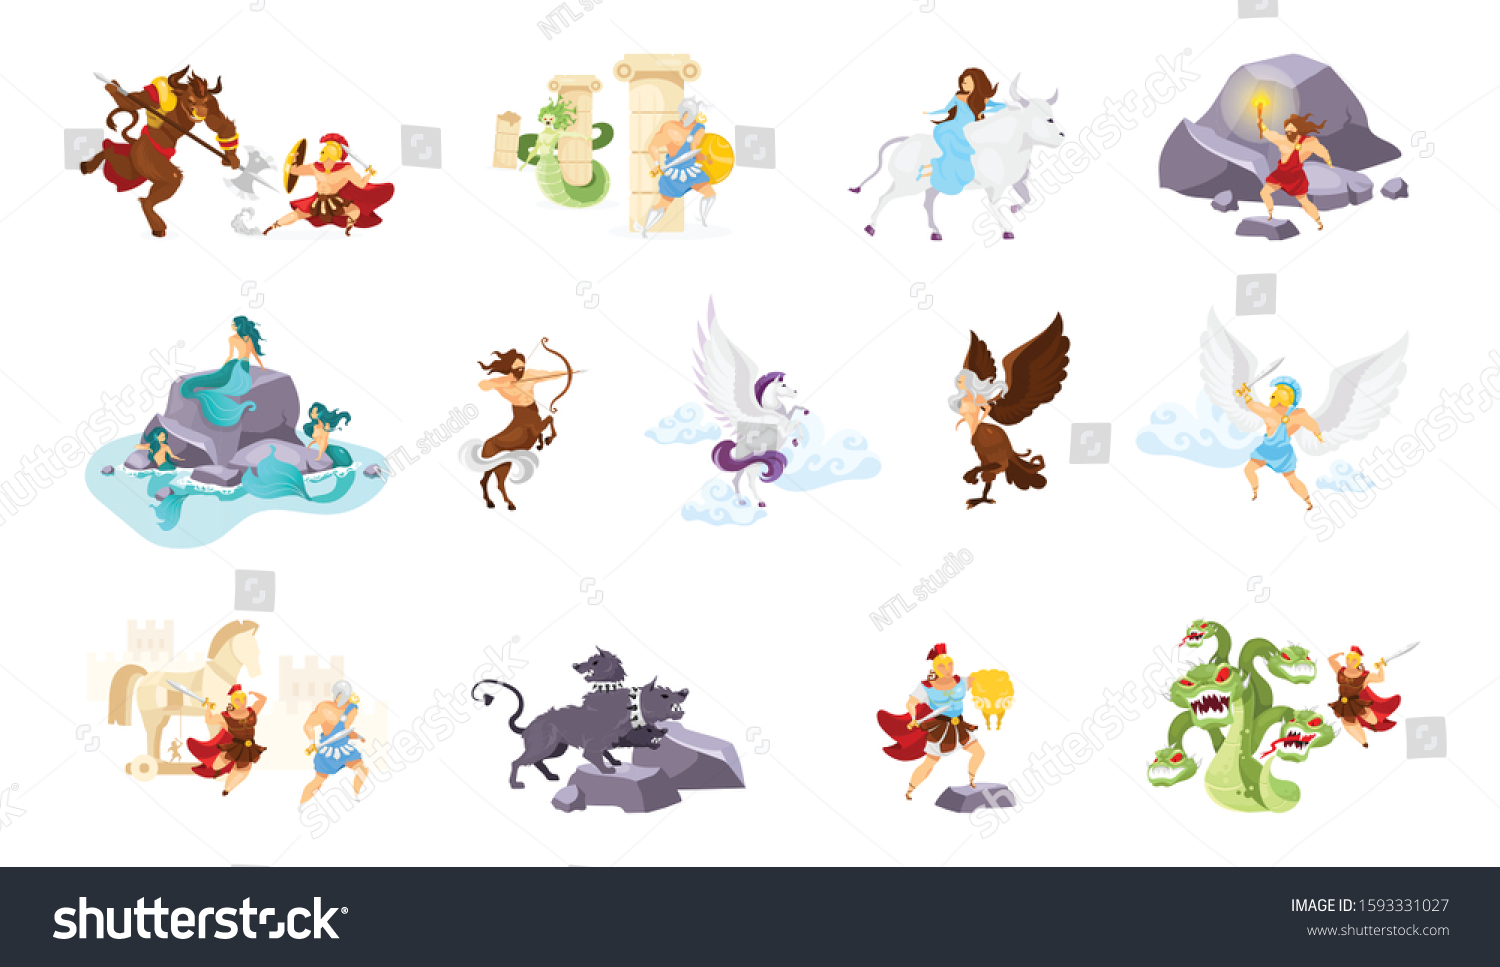 SVG of Greek mythology flat vector illustrations set. Minotaur and Theseus. Medusa and Perseus. Abduction of Europa. Cerberus. Trojan war. Beast and fighters. Heroes and creatures isolated cartoon characters svg